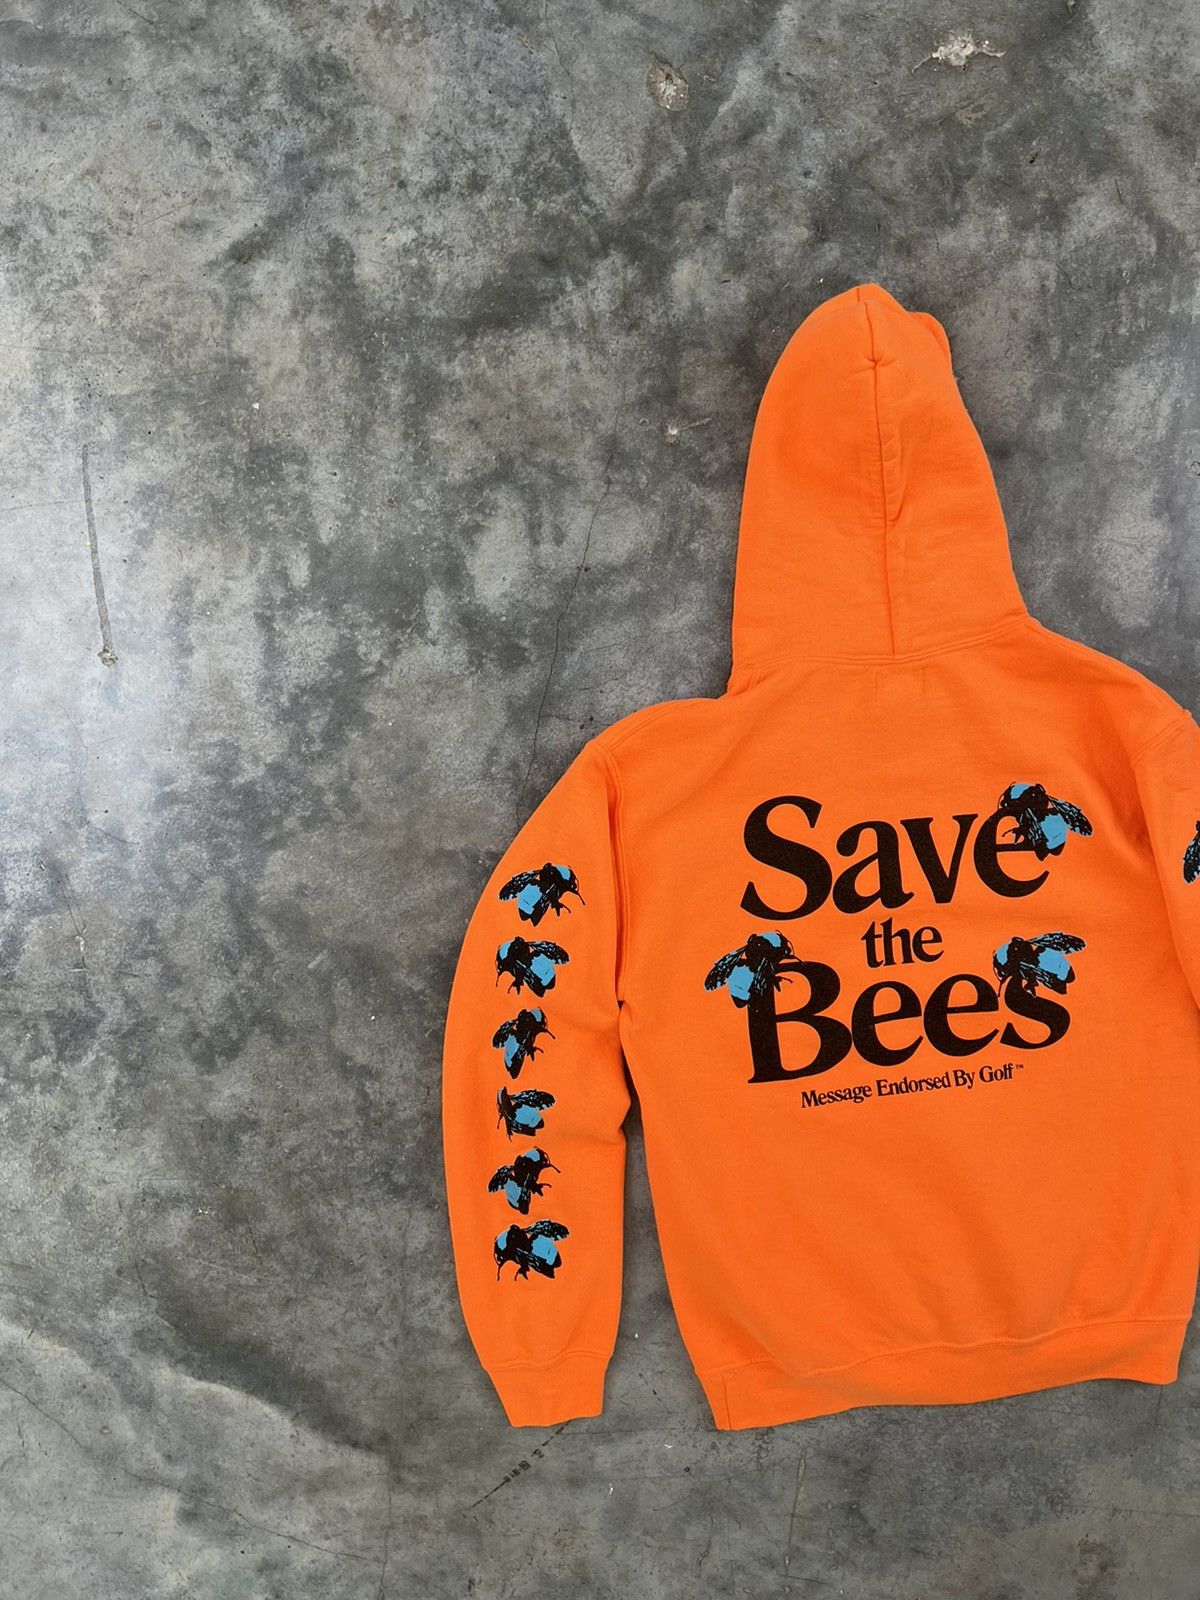 Golf Wang Golf Wang Save The Bees Neon Orange Hoodie Sz. Small Size US S / EU 44-46 / 1 - 2 Preview